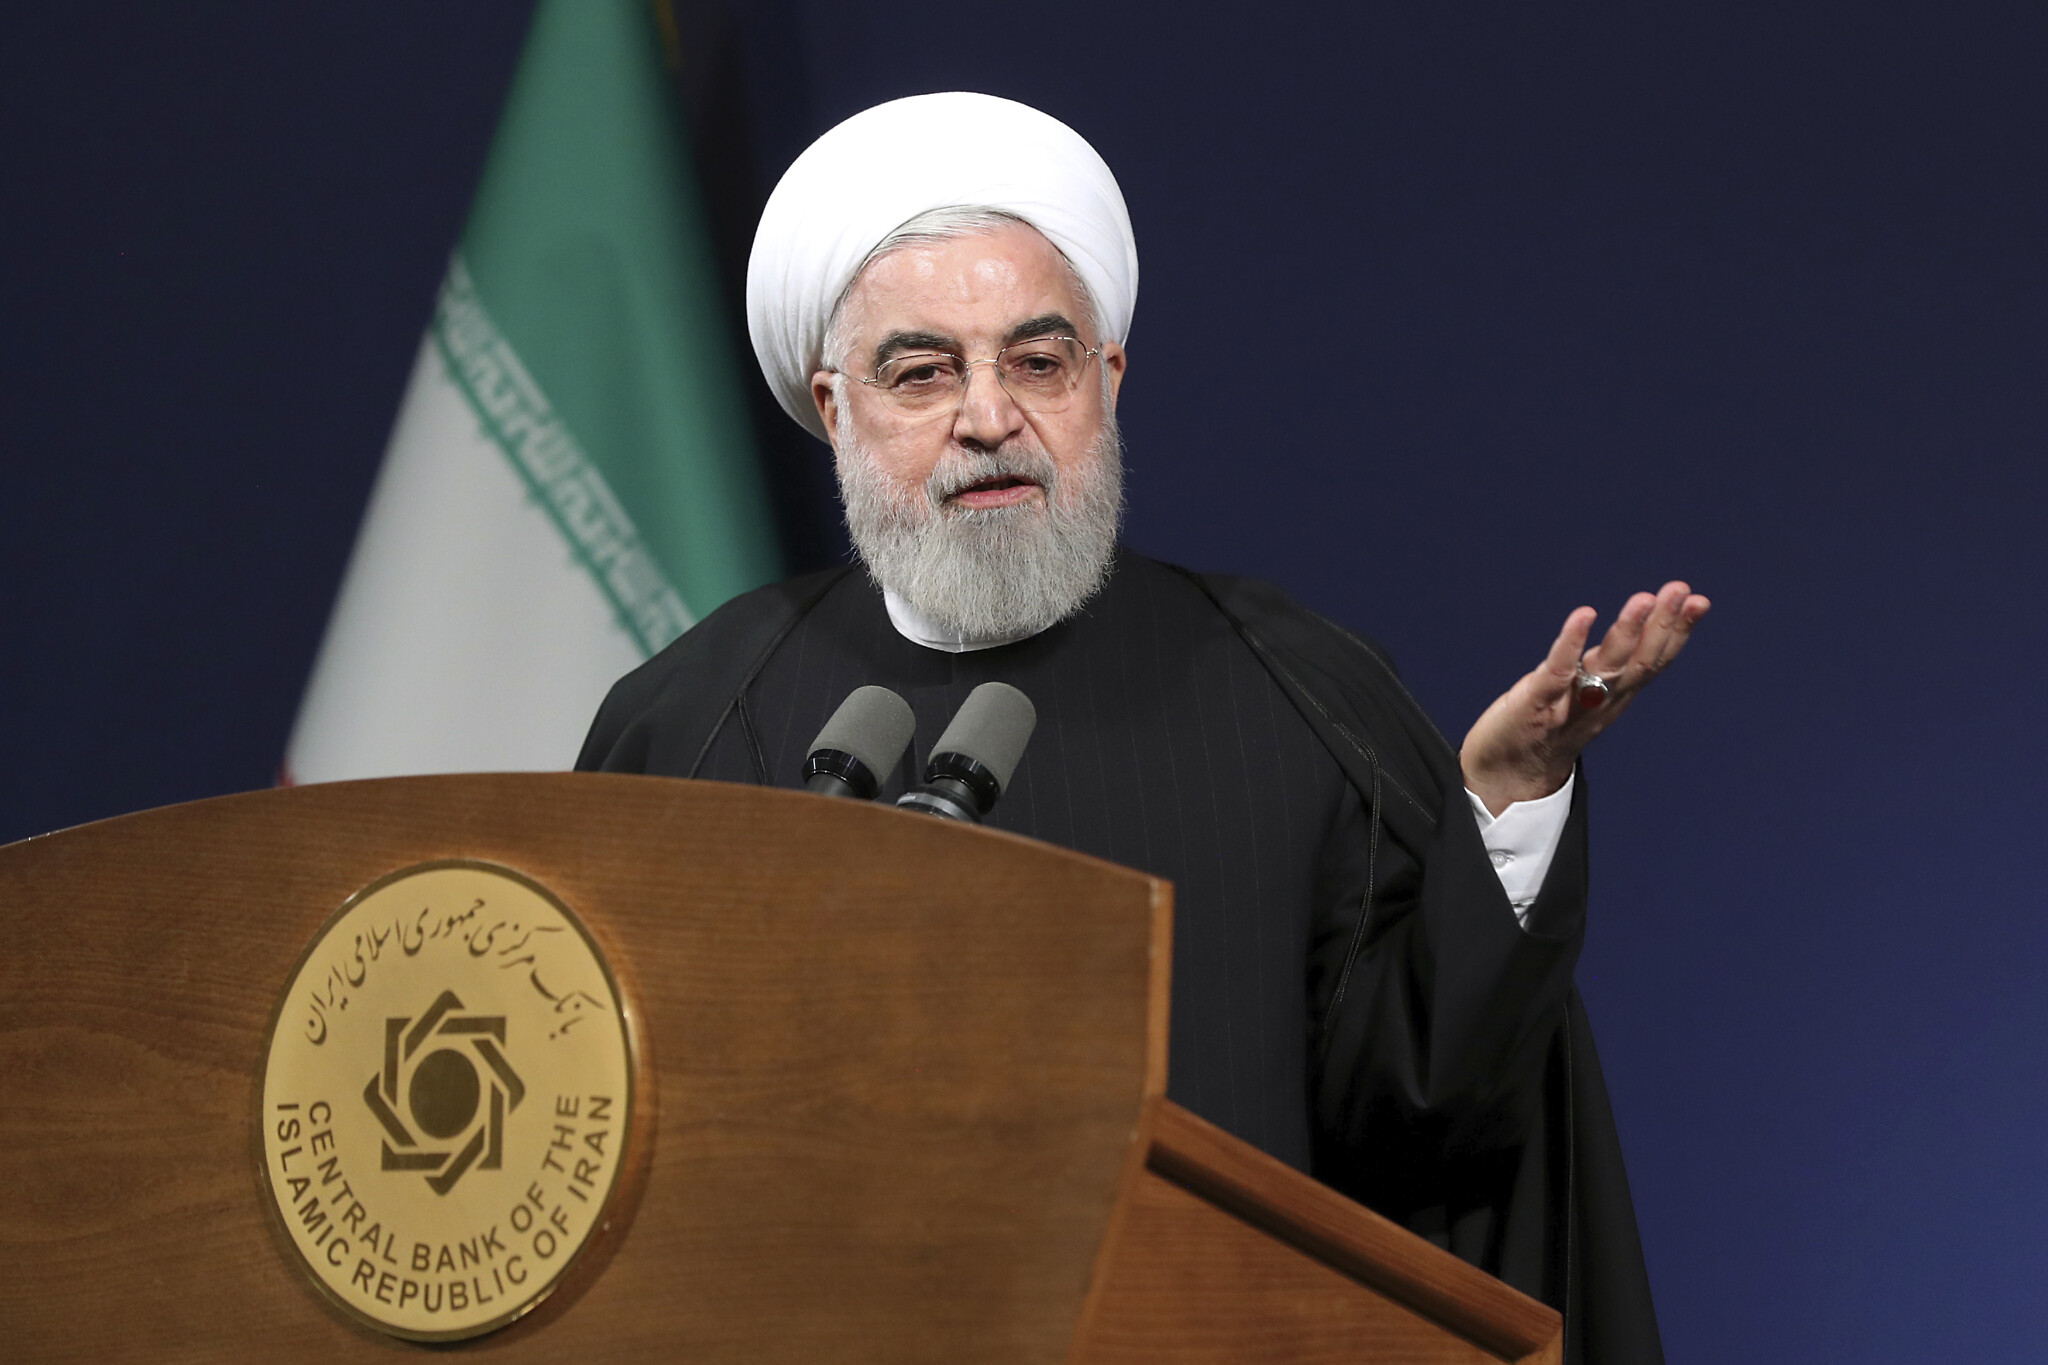 Rouhani says Iran wants dialogue, working to prevent war